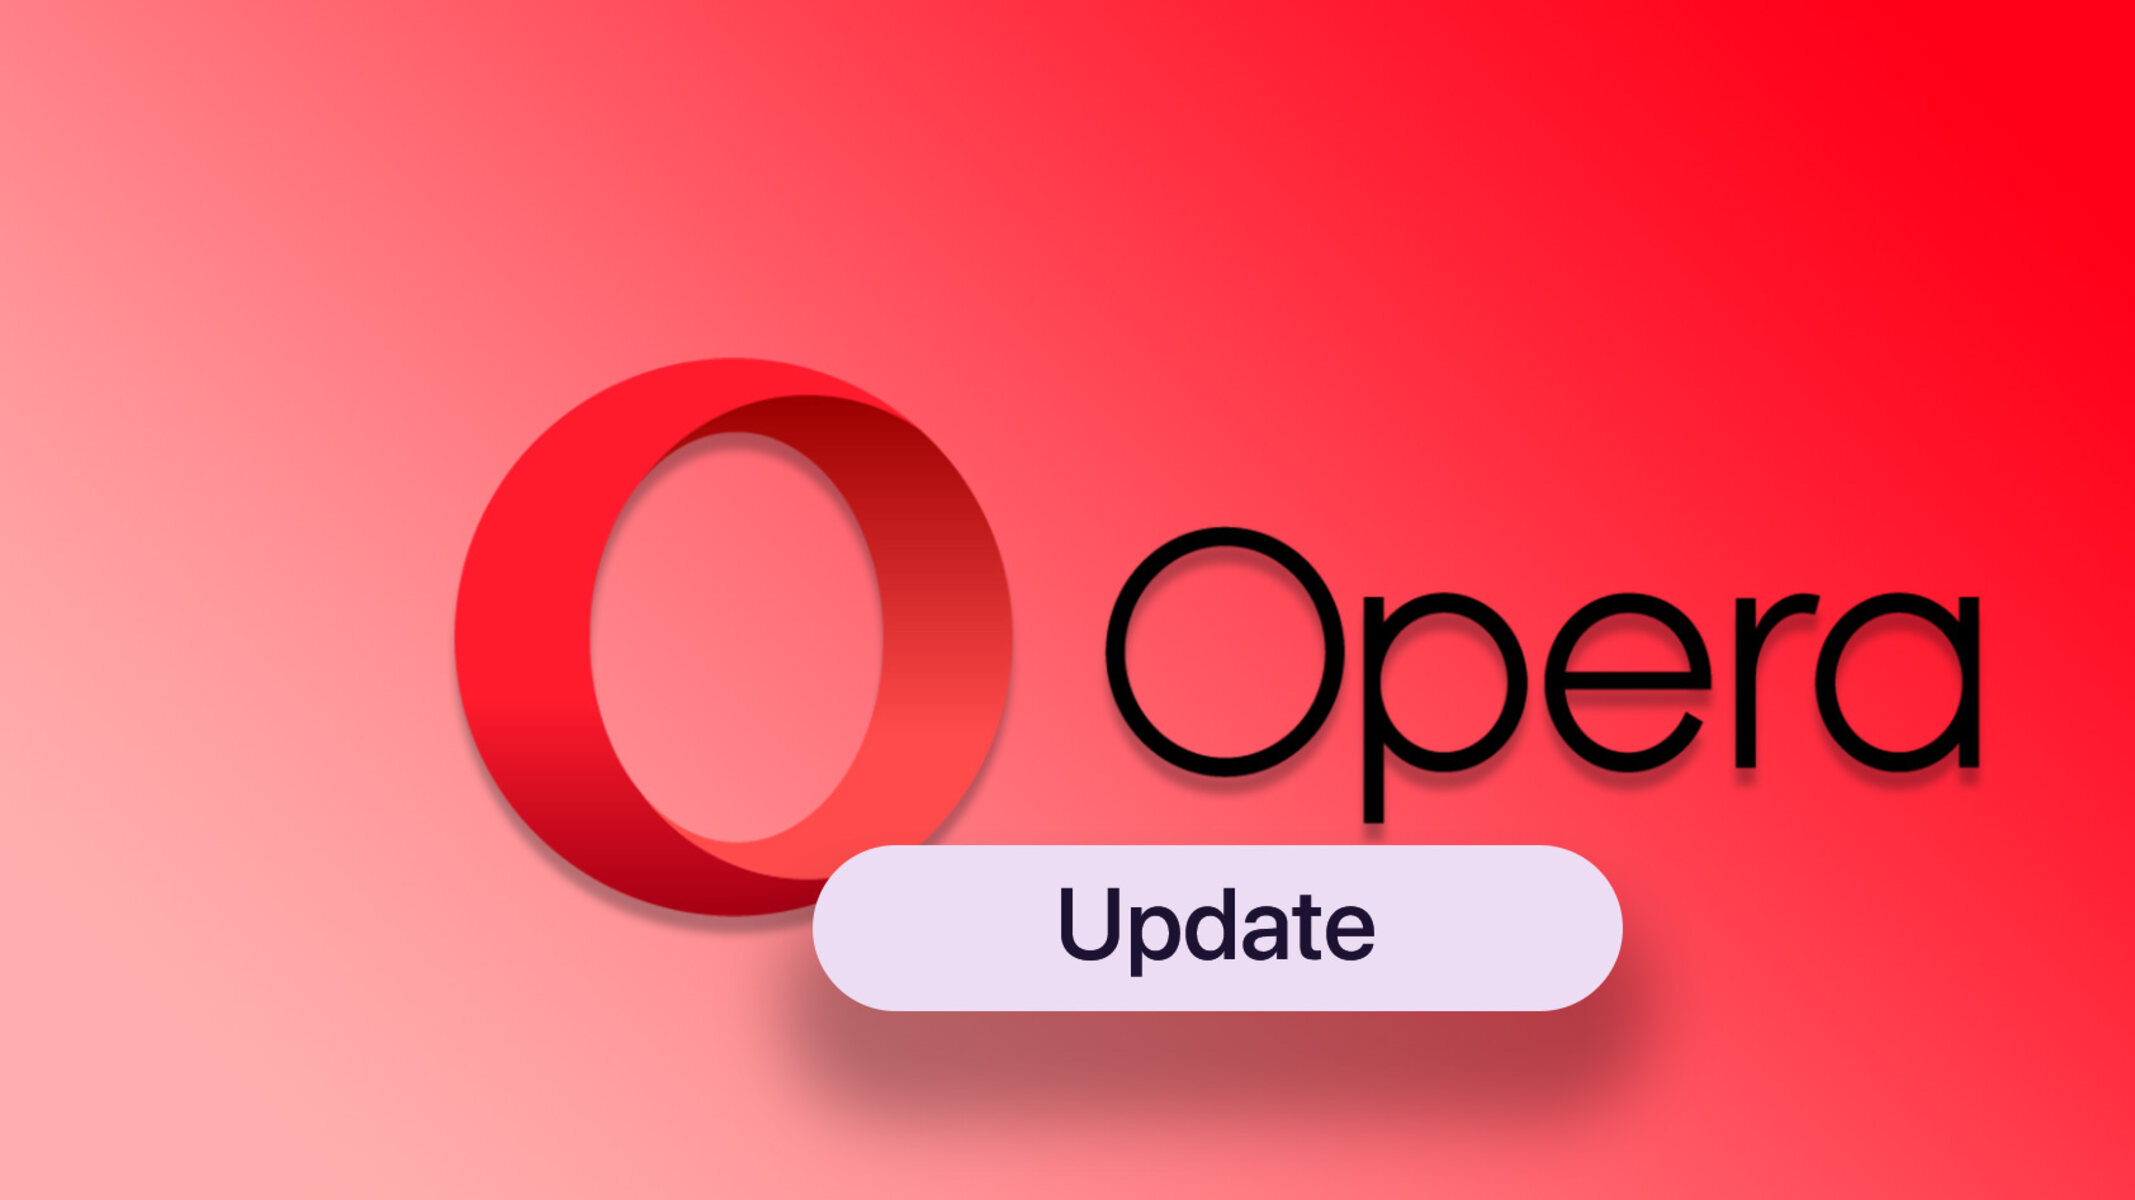 How To Update Opera Browser